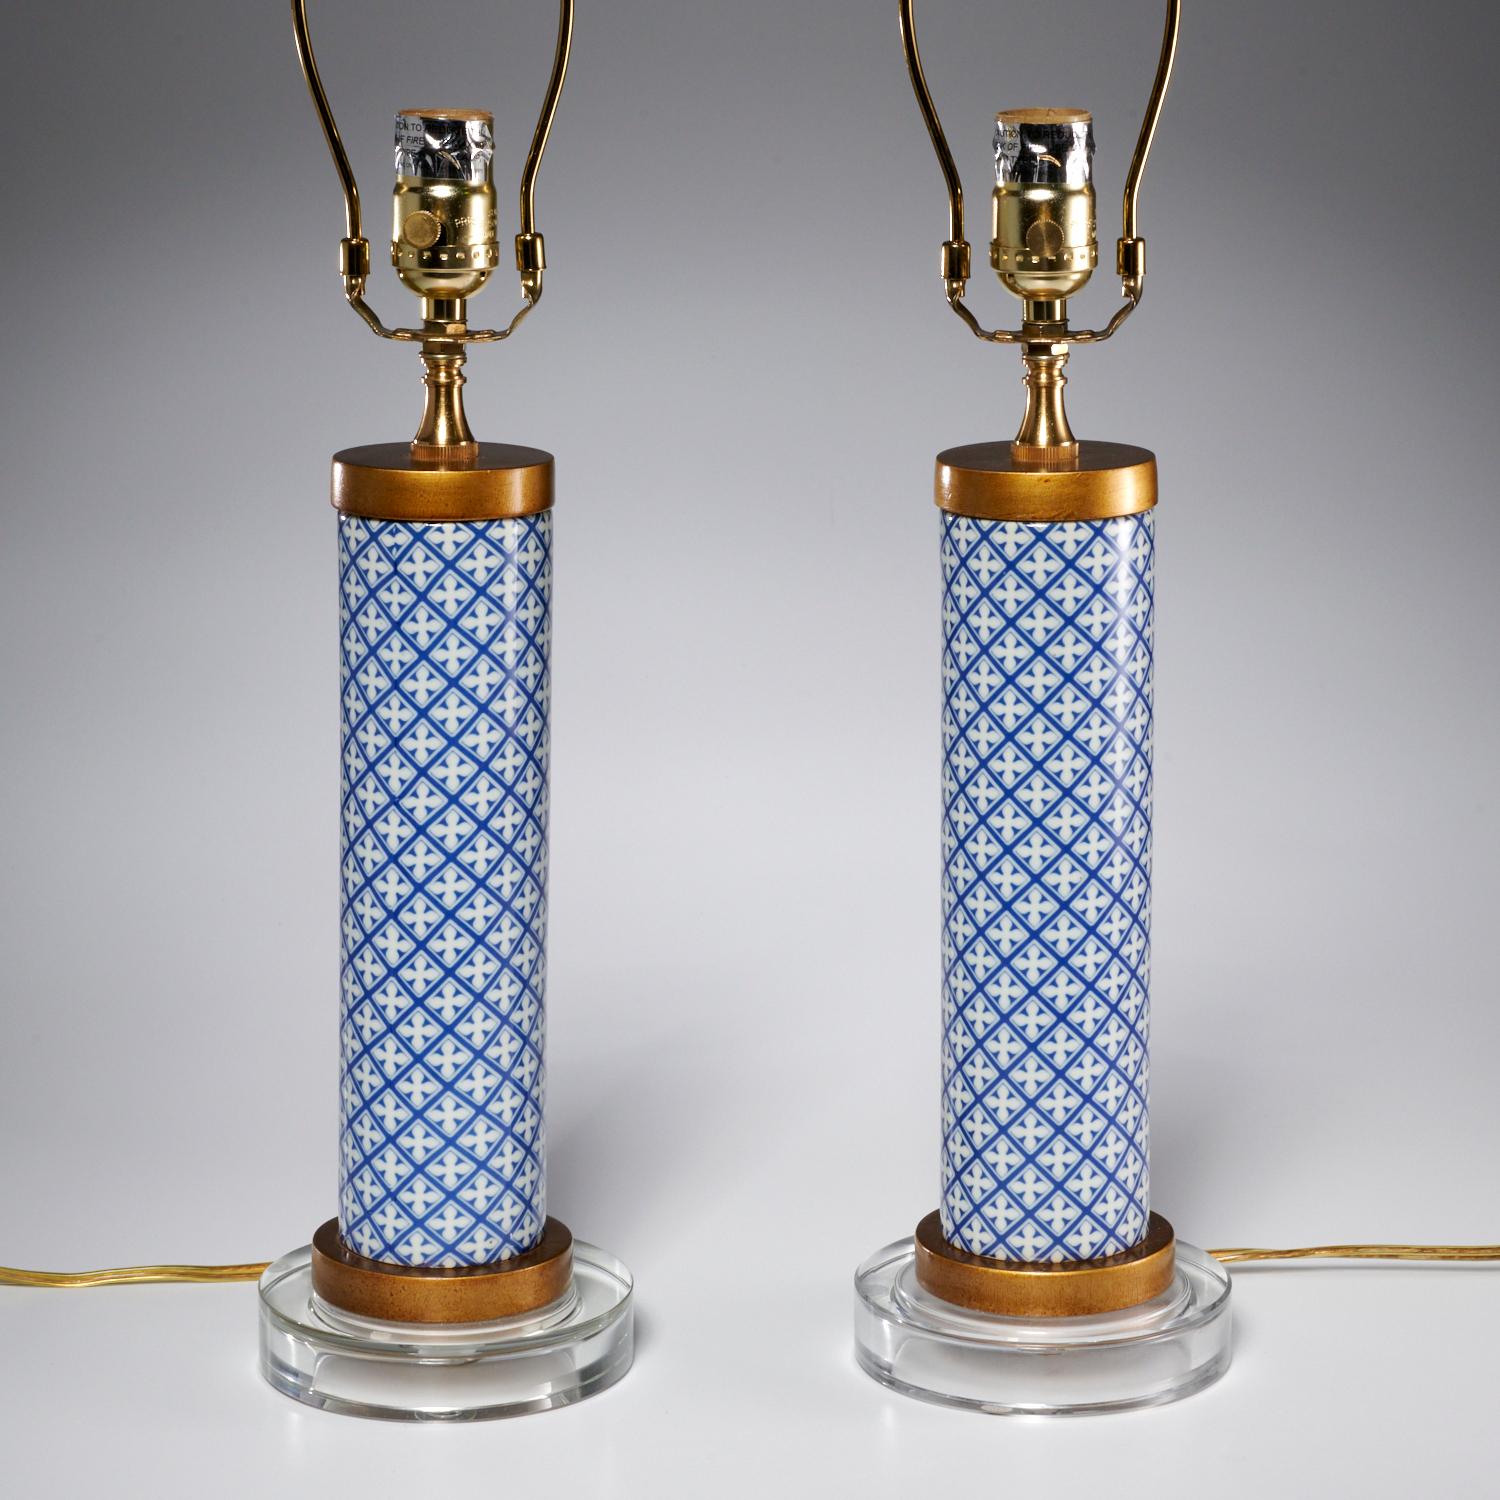 A pair of 21st c., cylinder table lamps in blue and white geometric porcelain with brass and lucite details and pleated white fabric lamp shades. These lamps are very crisp with pleasing clean lines. They come from a beautifully furnished and